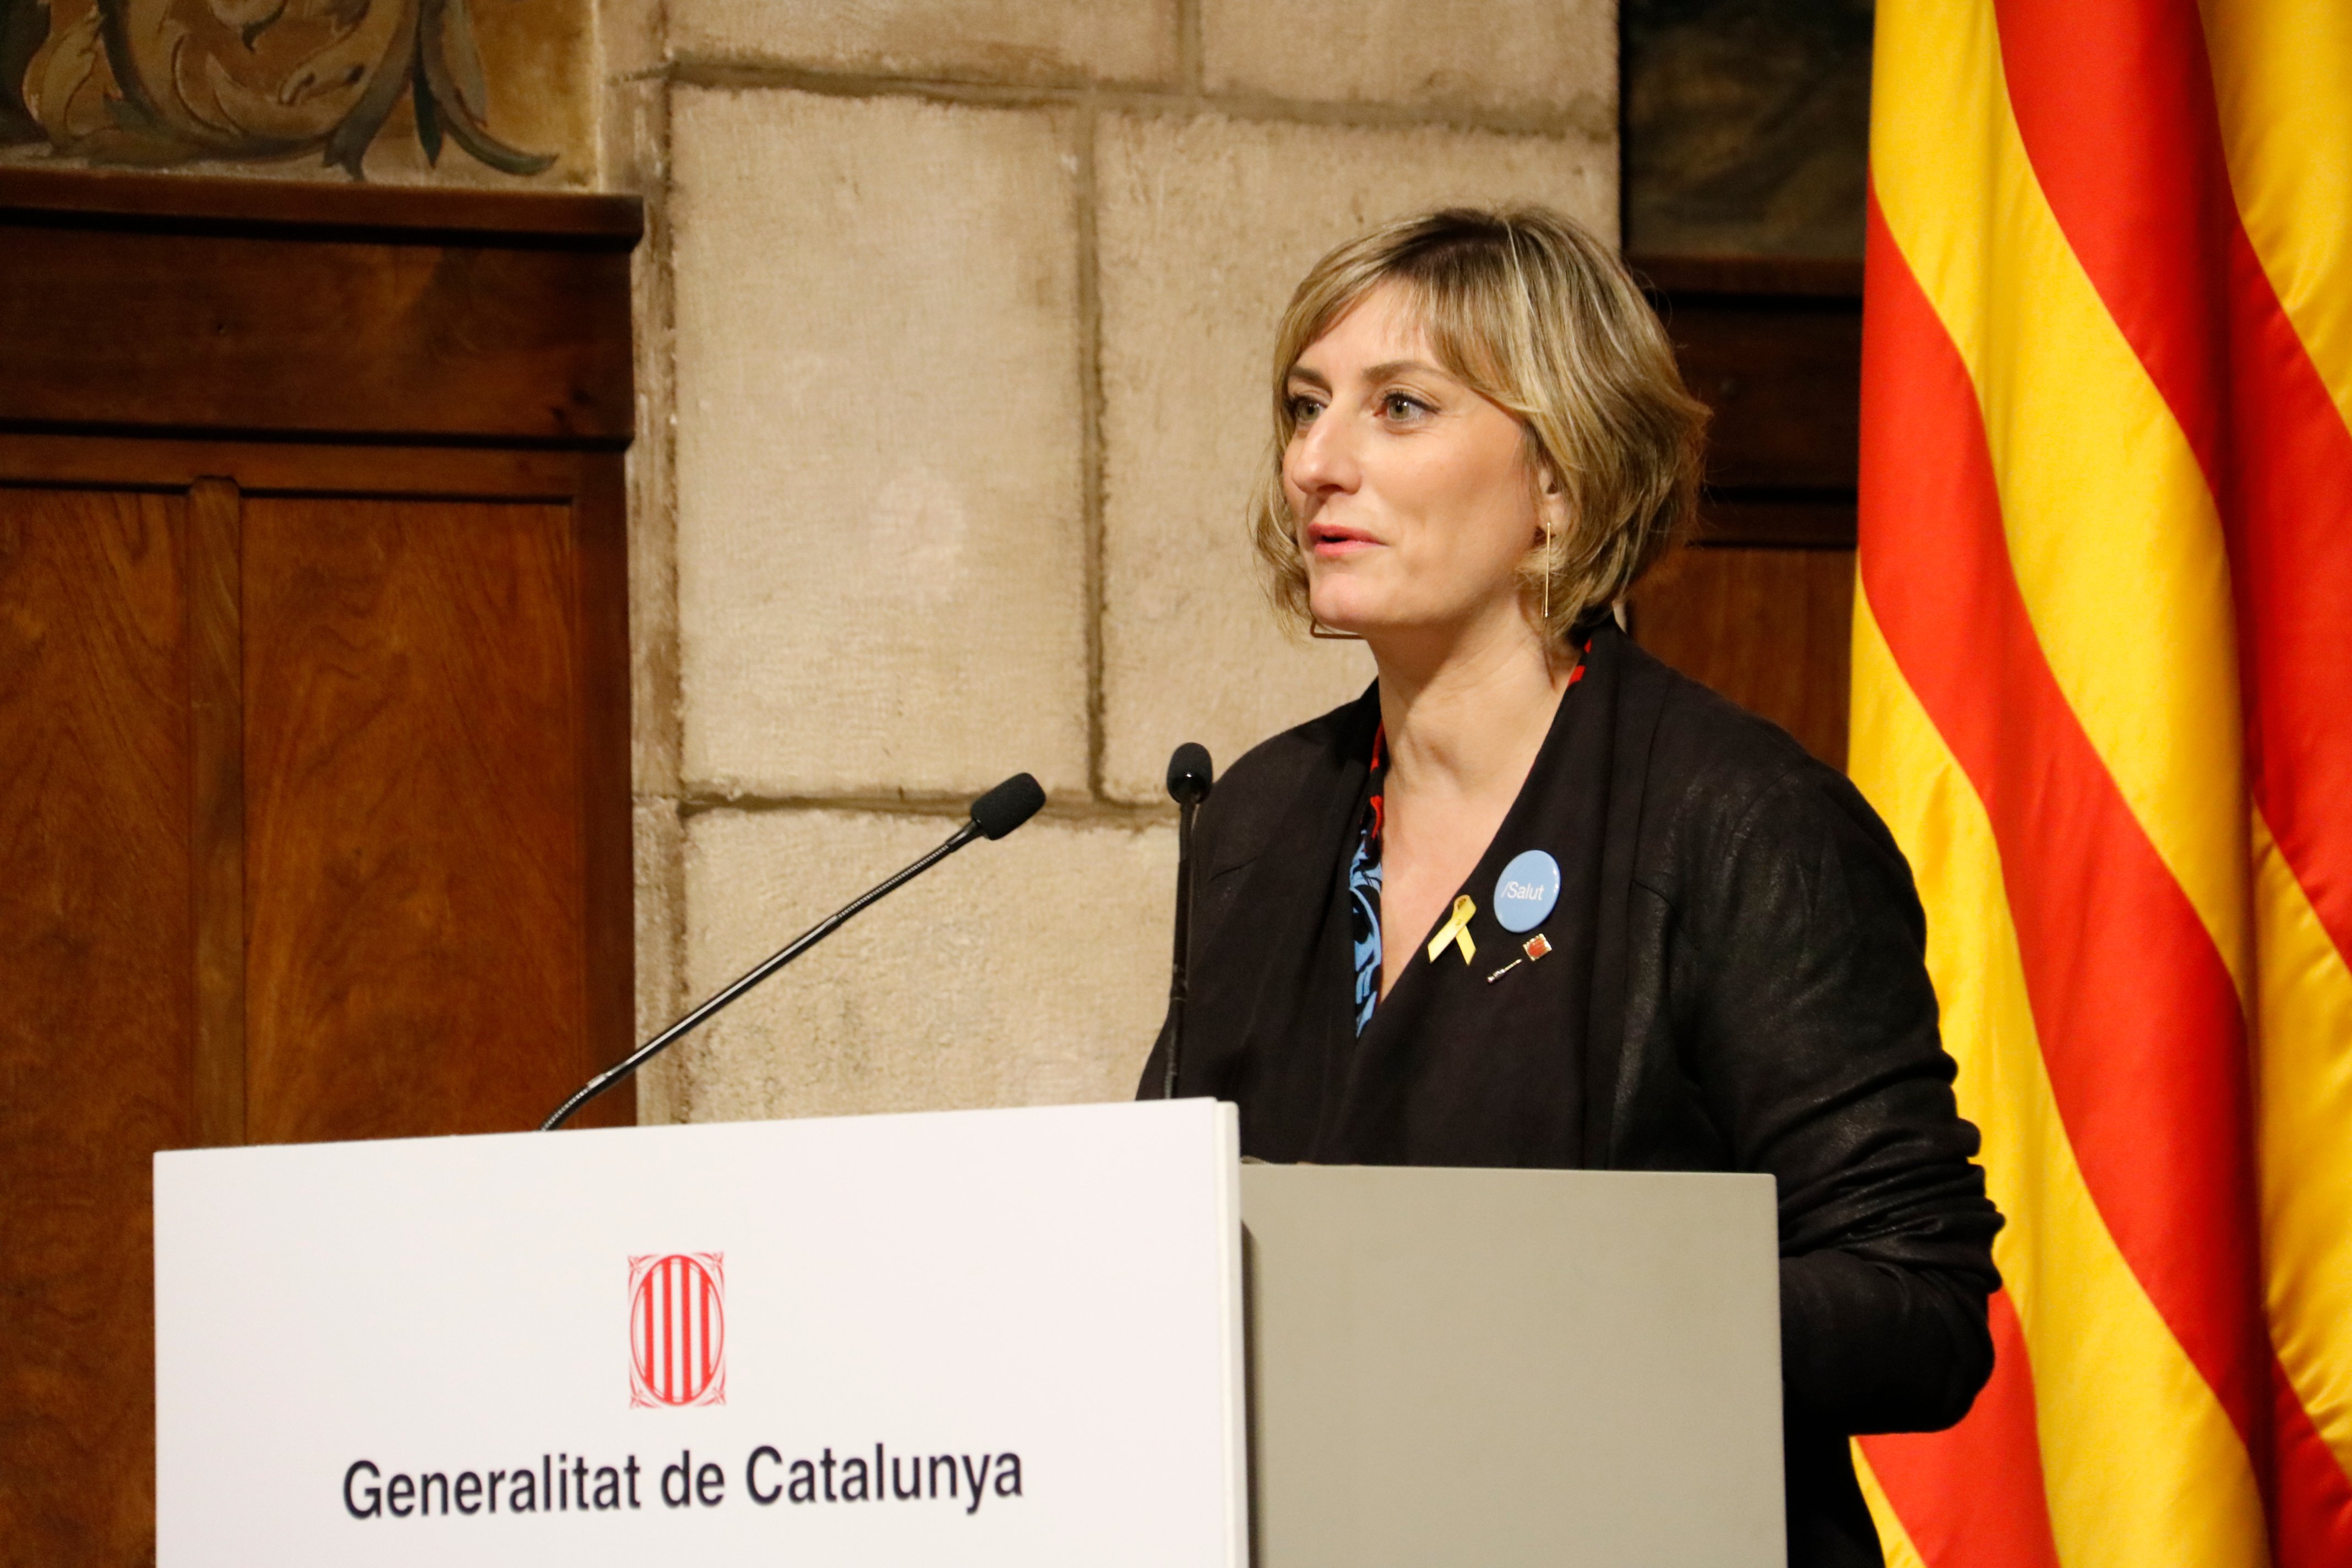 Vergés asks Catalan workers to be virus-vigilant in the current "imposed situation"